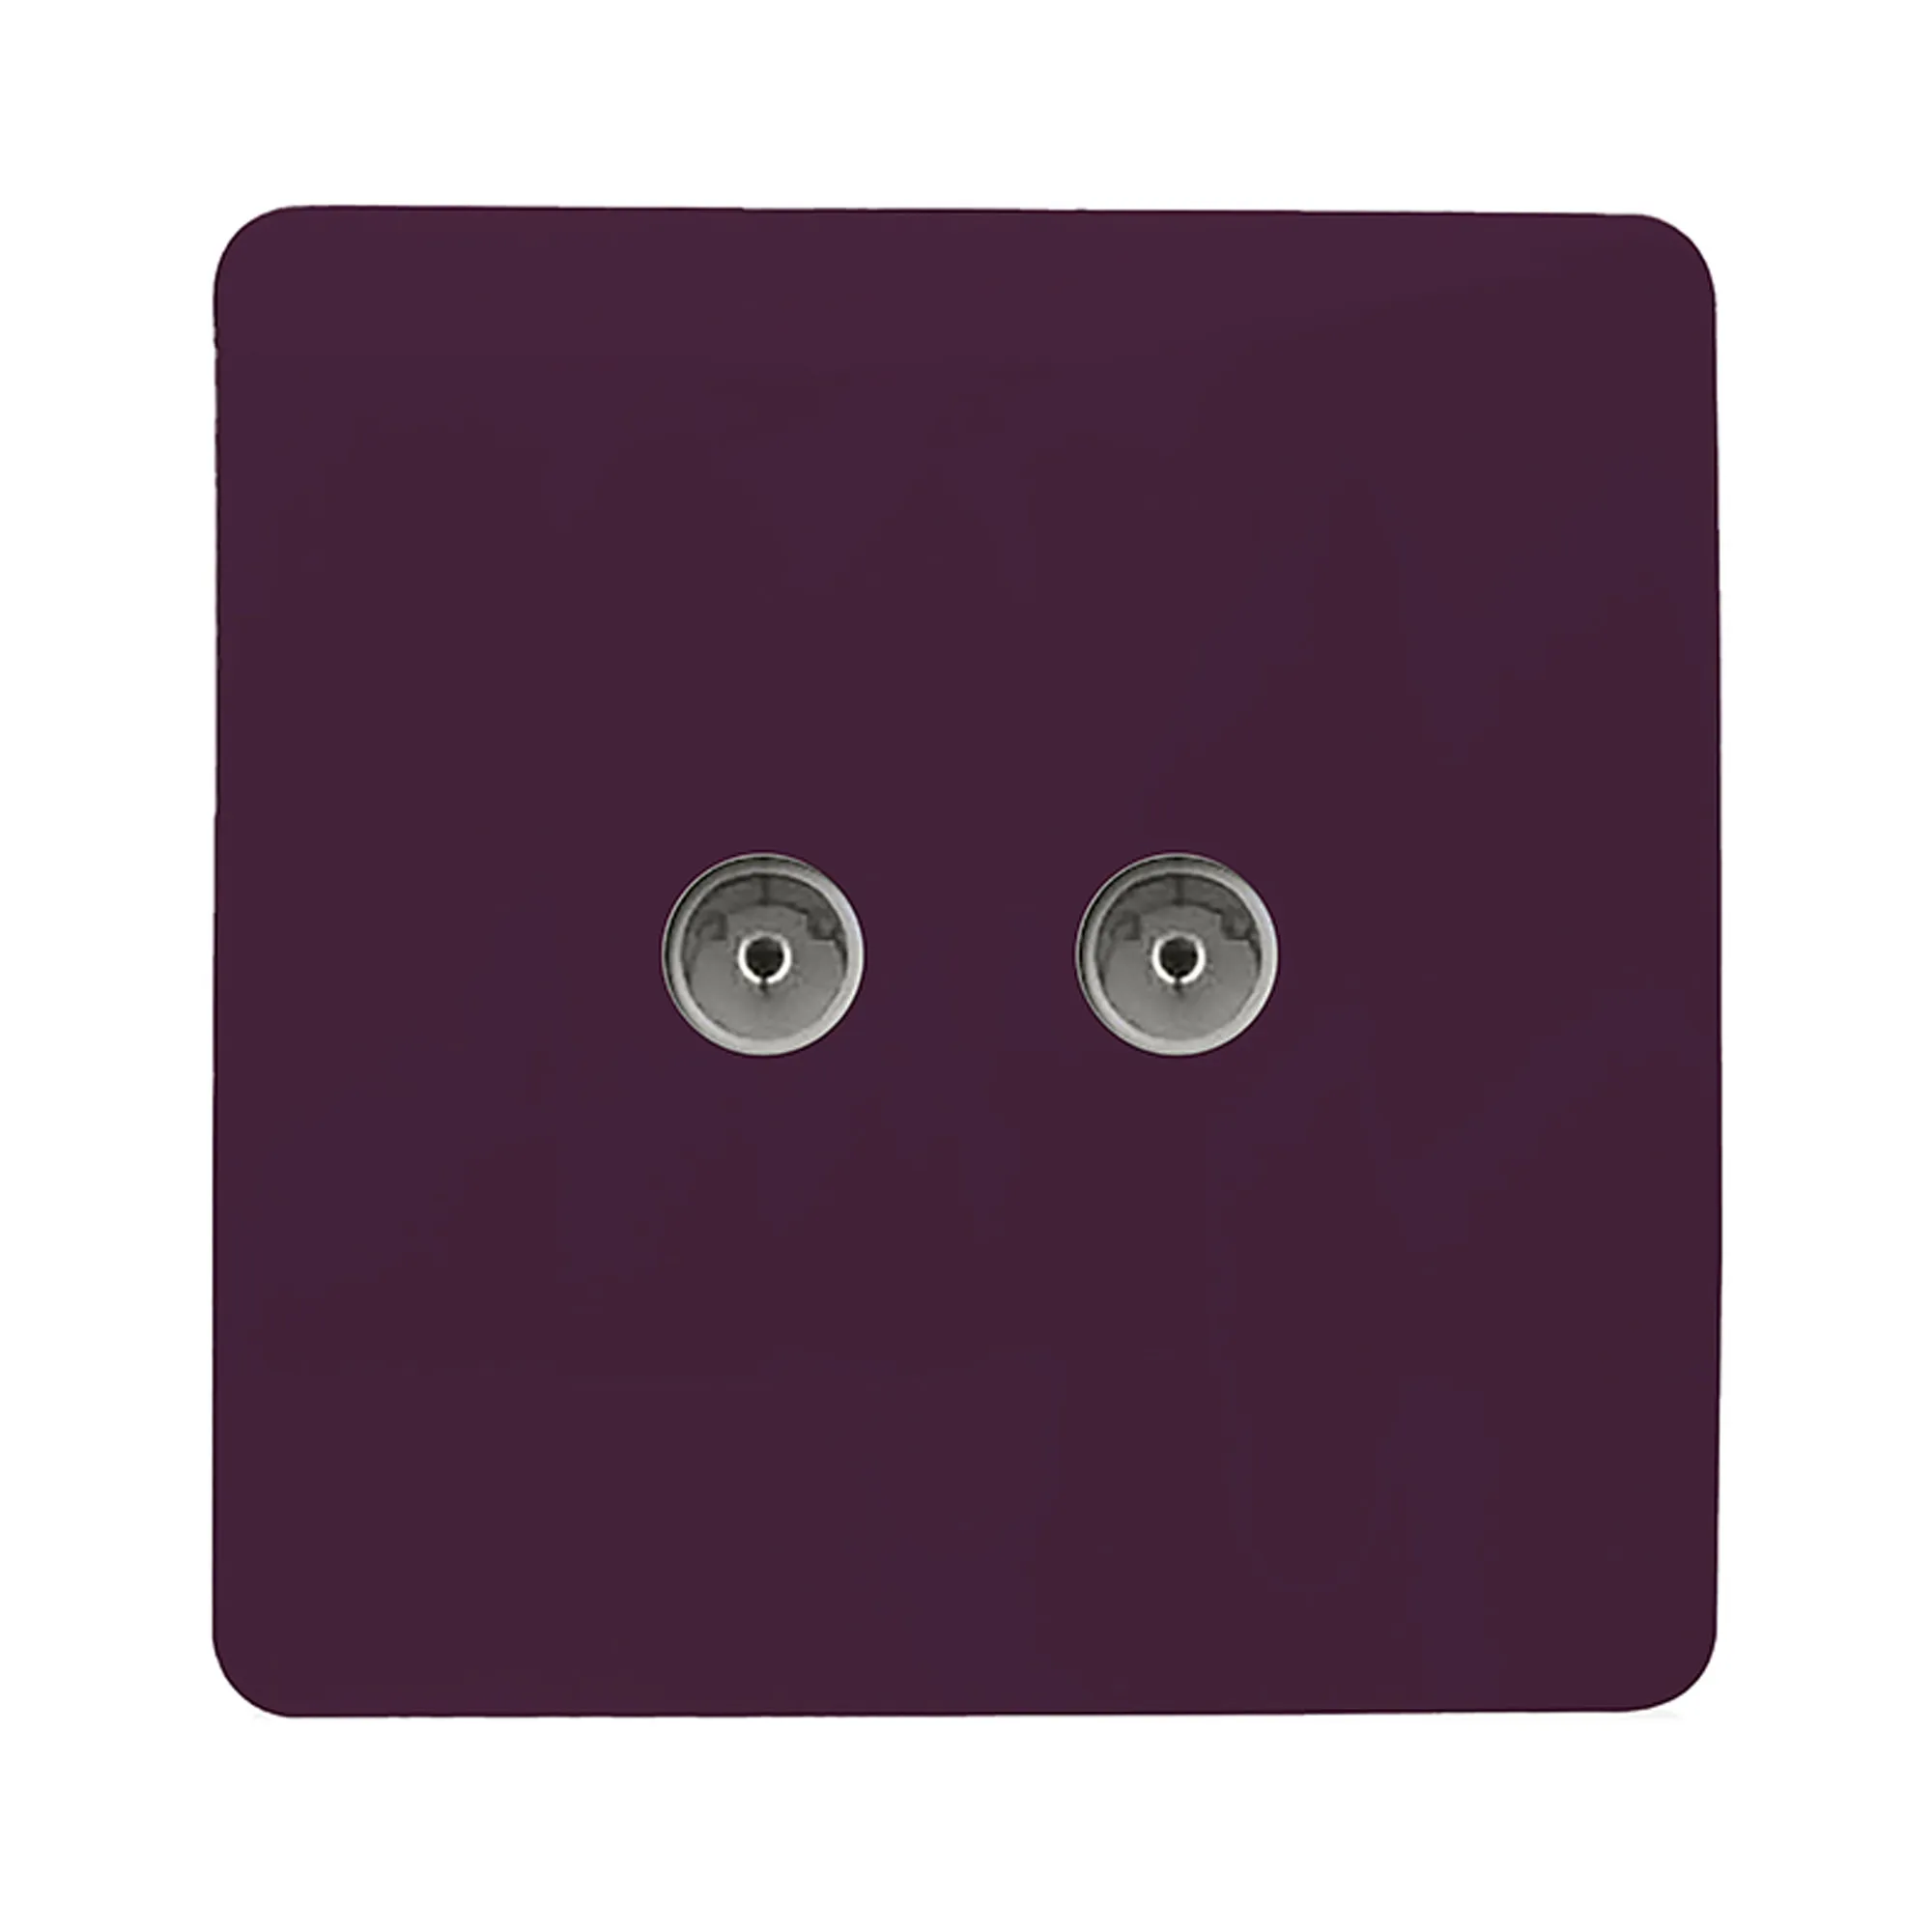 Twin TV Co-Axial Outlet Plum